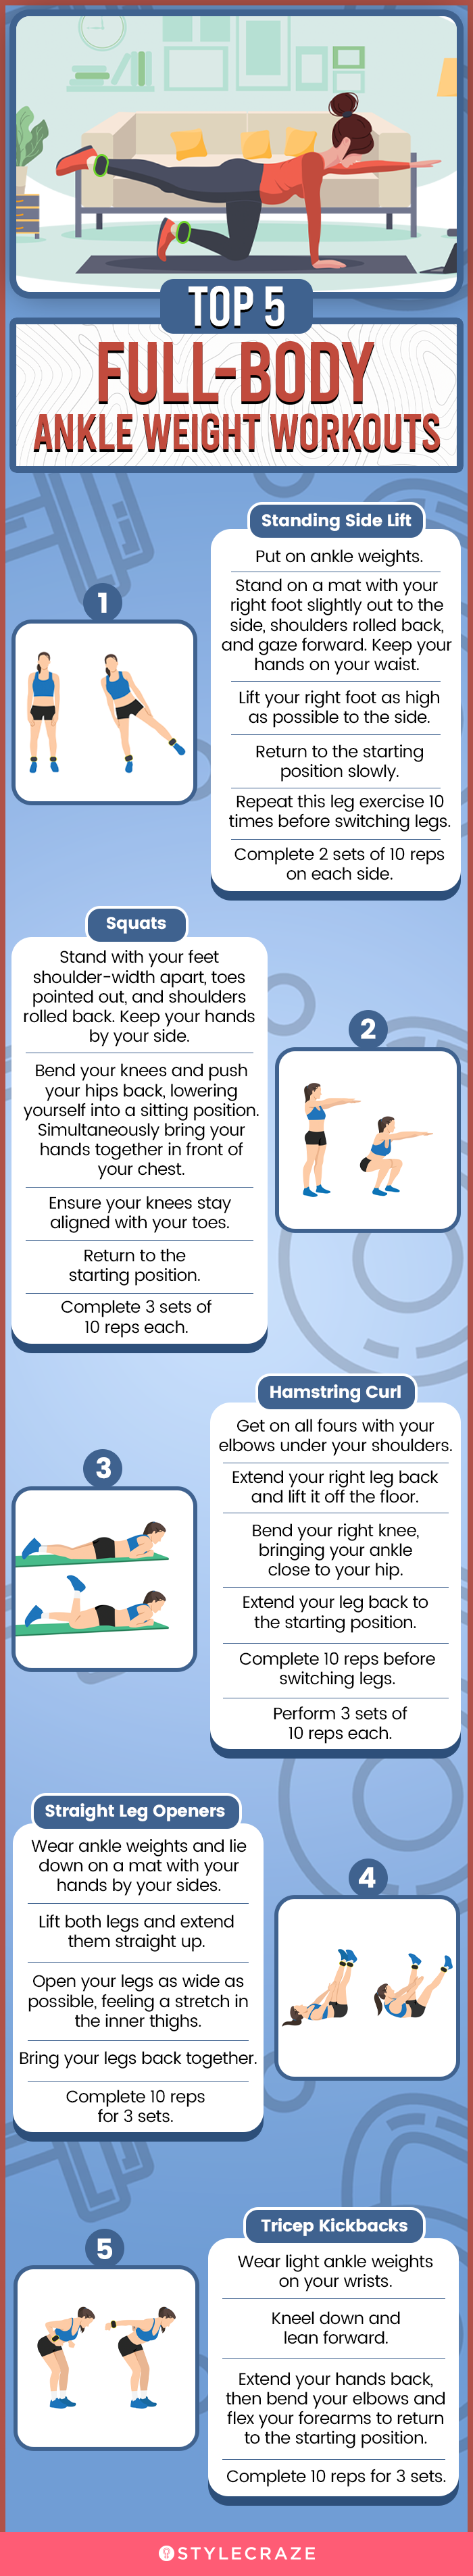 top 5 full body ankle weight workouts (infographic)